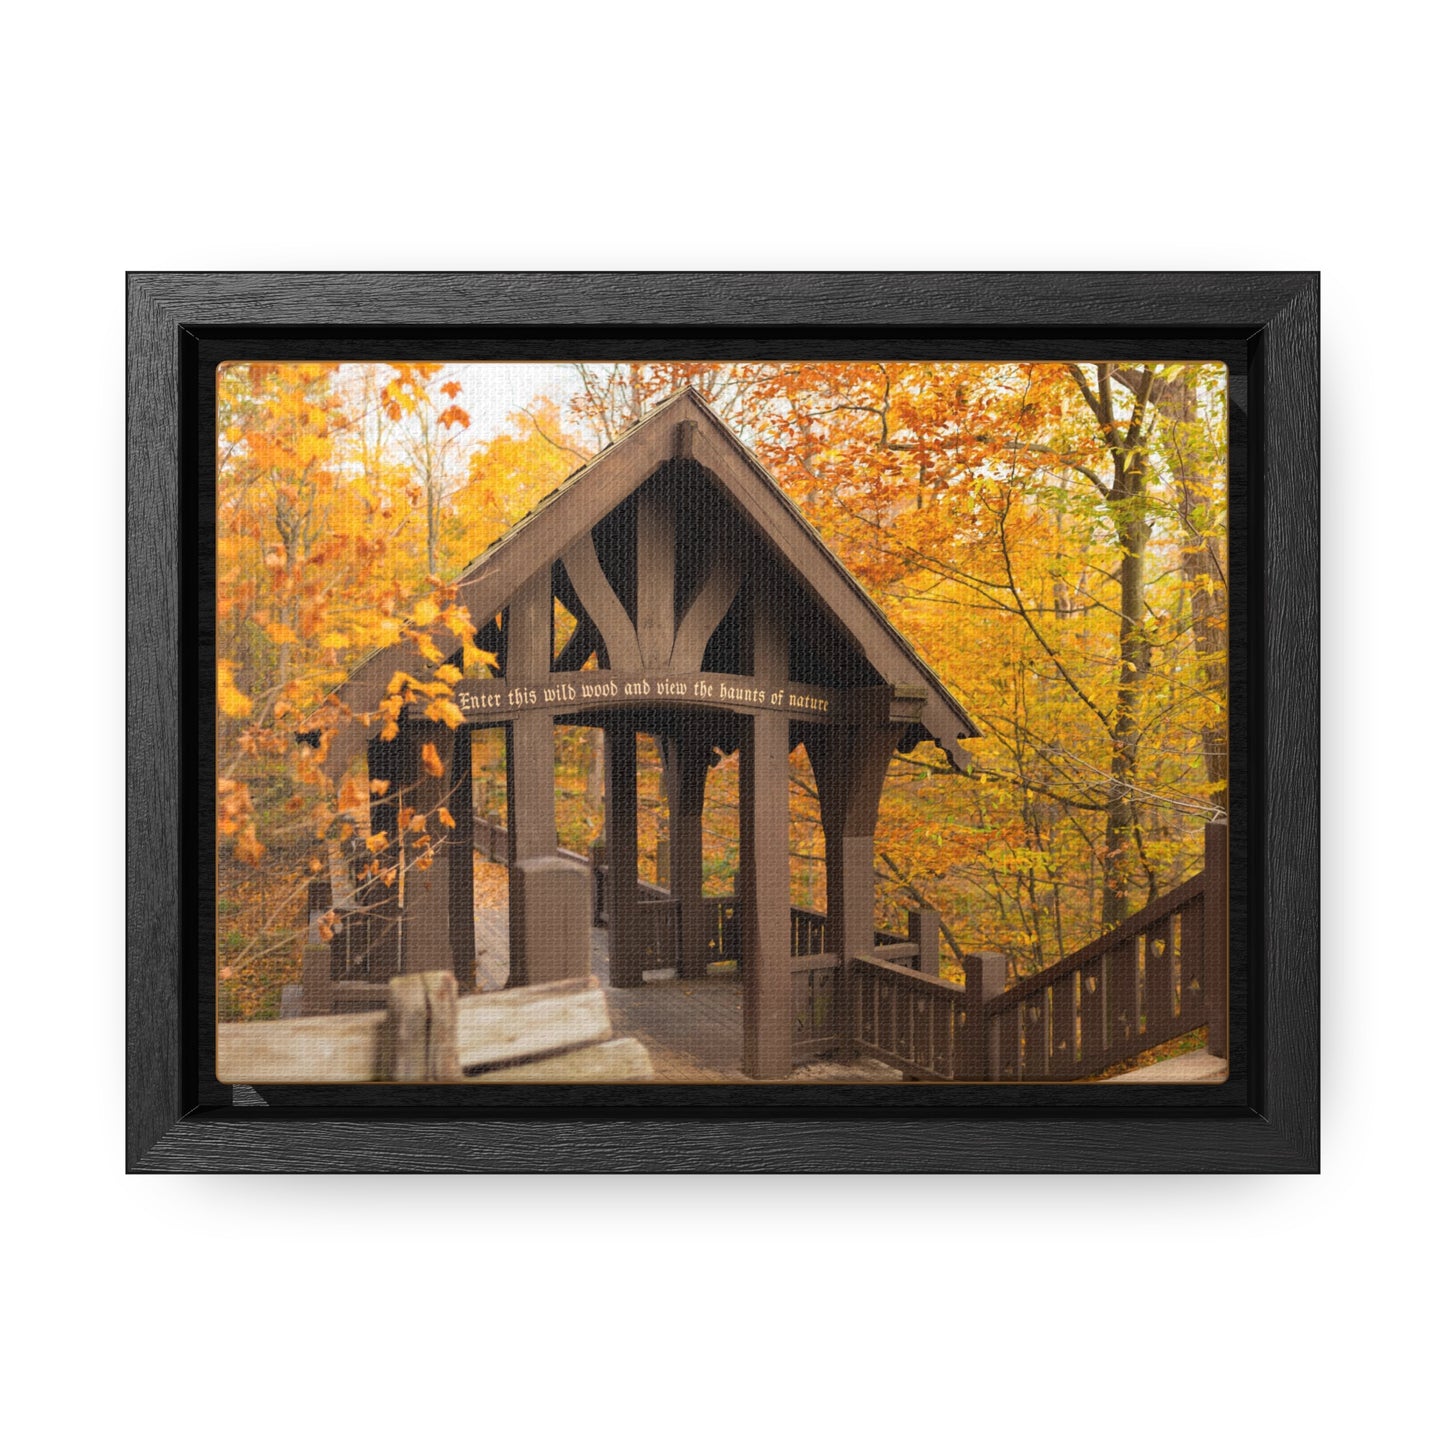 7 Bridges Trail’s Covered Bridge at Grant Park in South Milwaukee Wisconsin, Photography Framed Canvas Wrap Wall Art